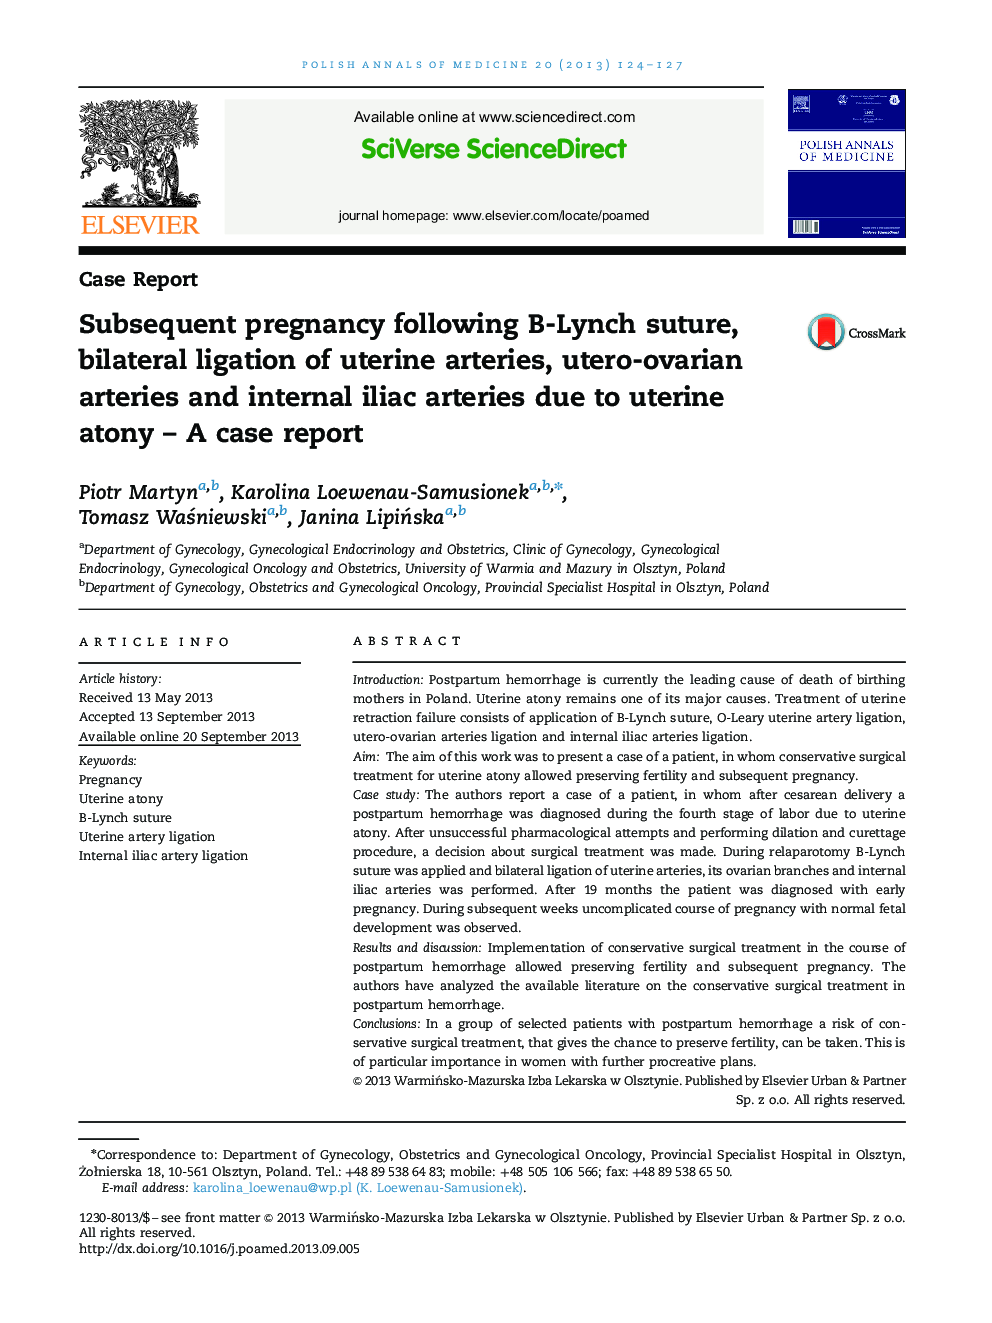 Subsequent pregnancy following B-Lynch suture, bilateral ligation of uterine arteries, utero-ovarian arteries and internal iliac arteries due to uterine atony – A case report